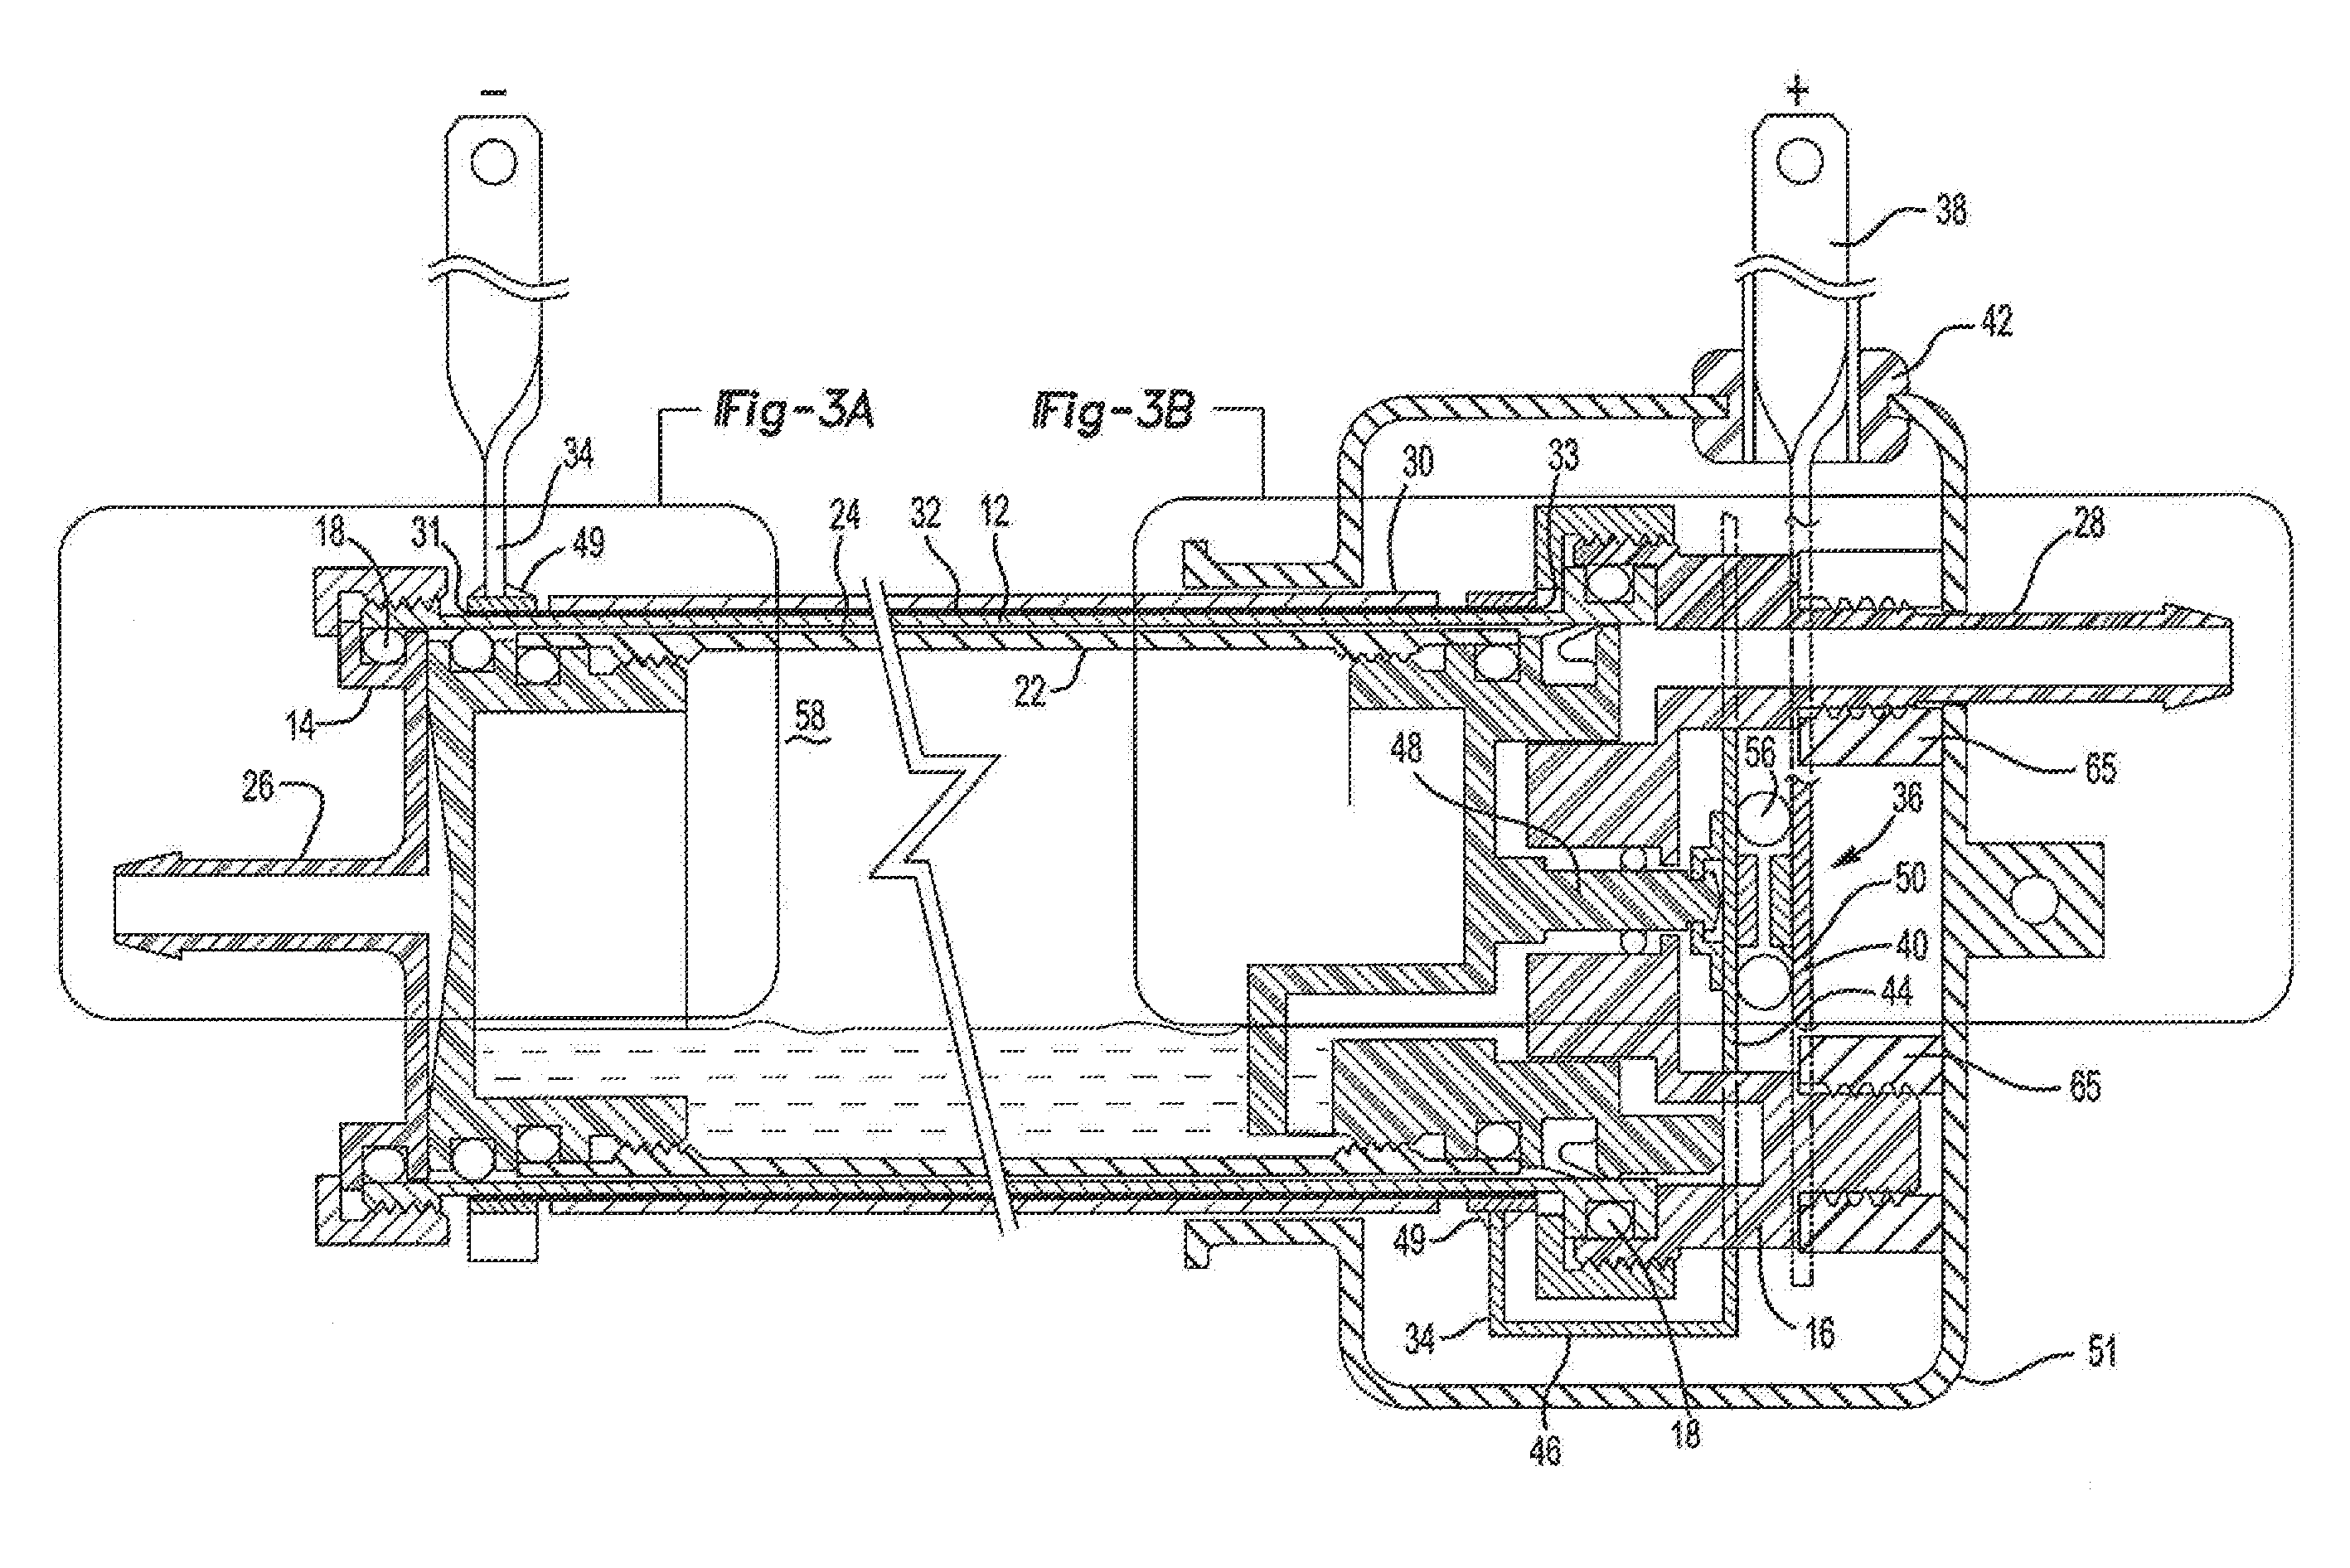 Electrically heating windshield washer fluid system